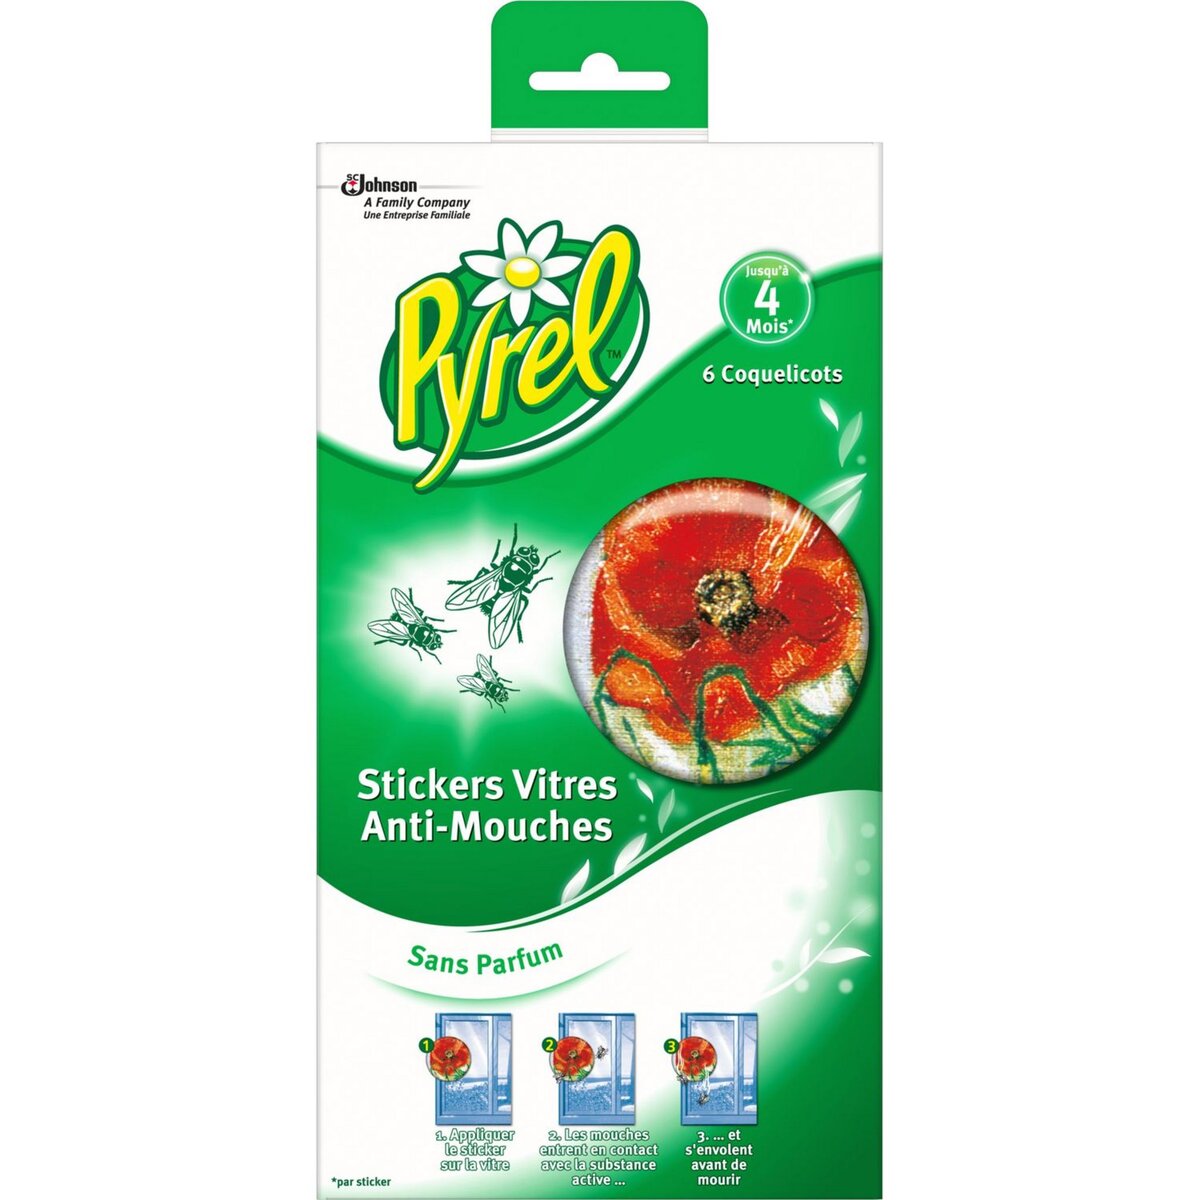 PYREL Stickers vitres coquelicots anti-mouches efficace 6x4 mois 6 stickers